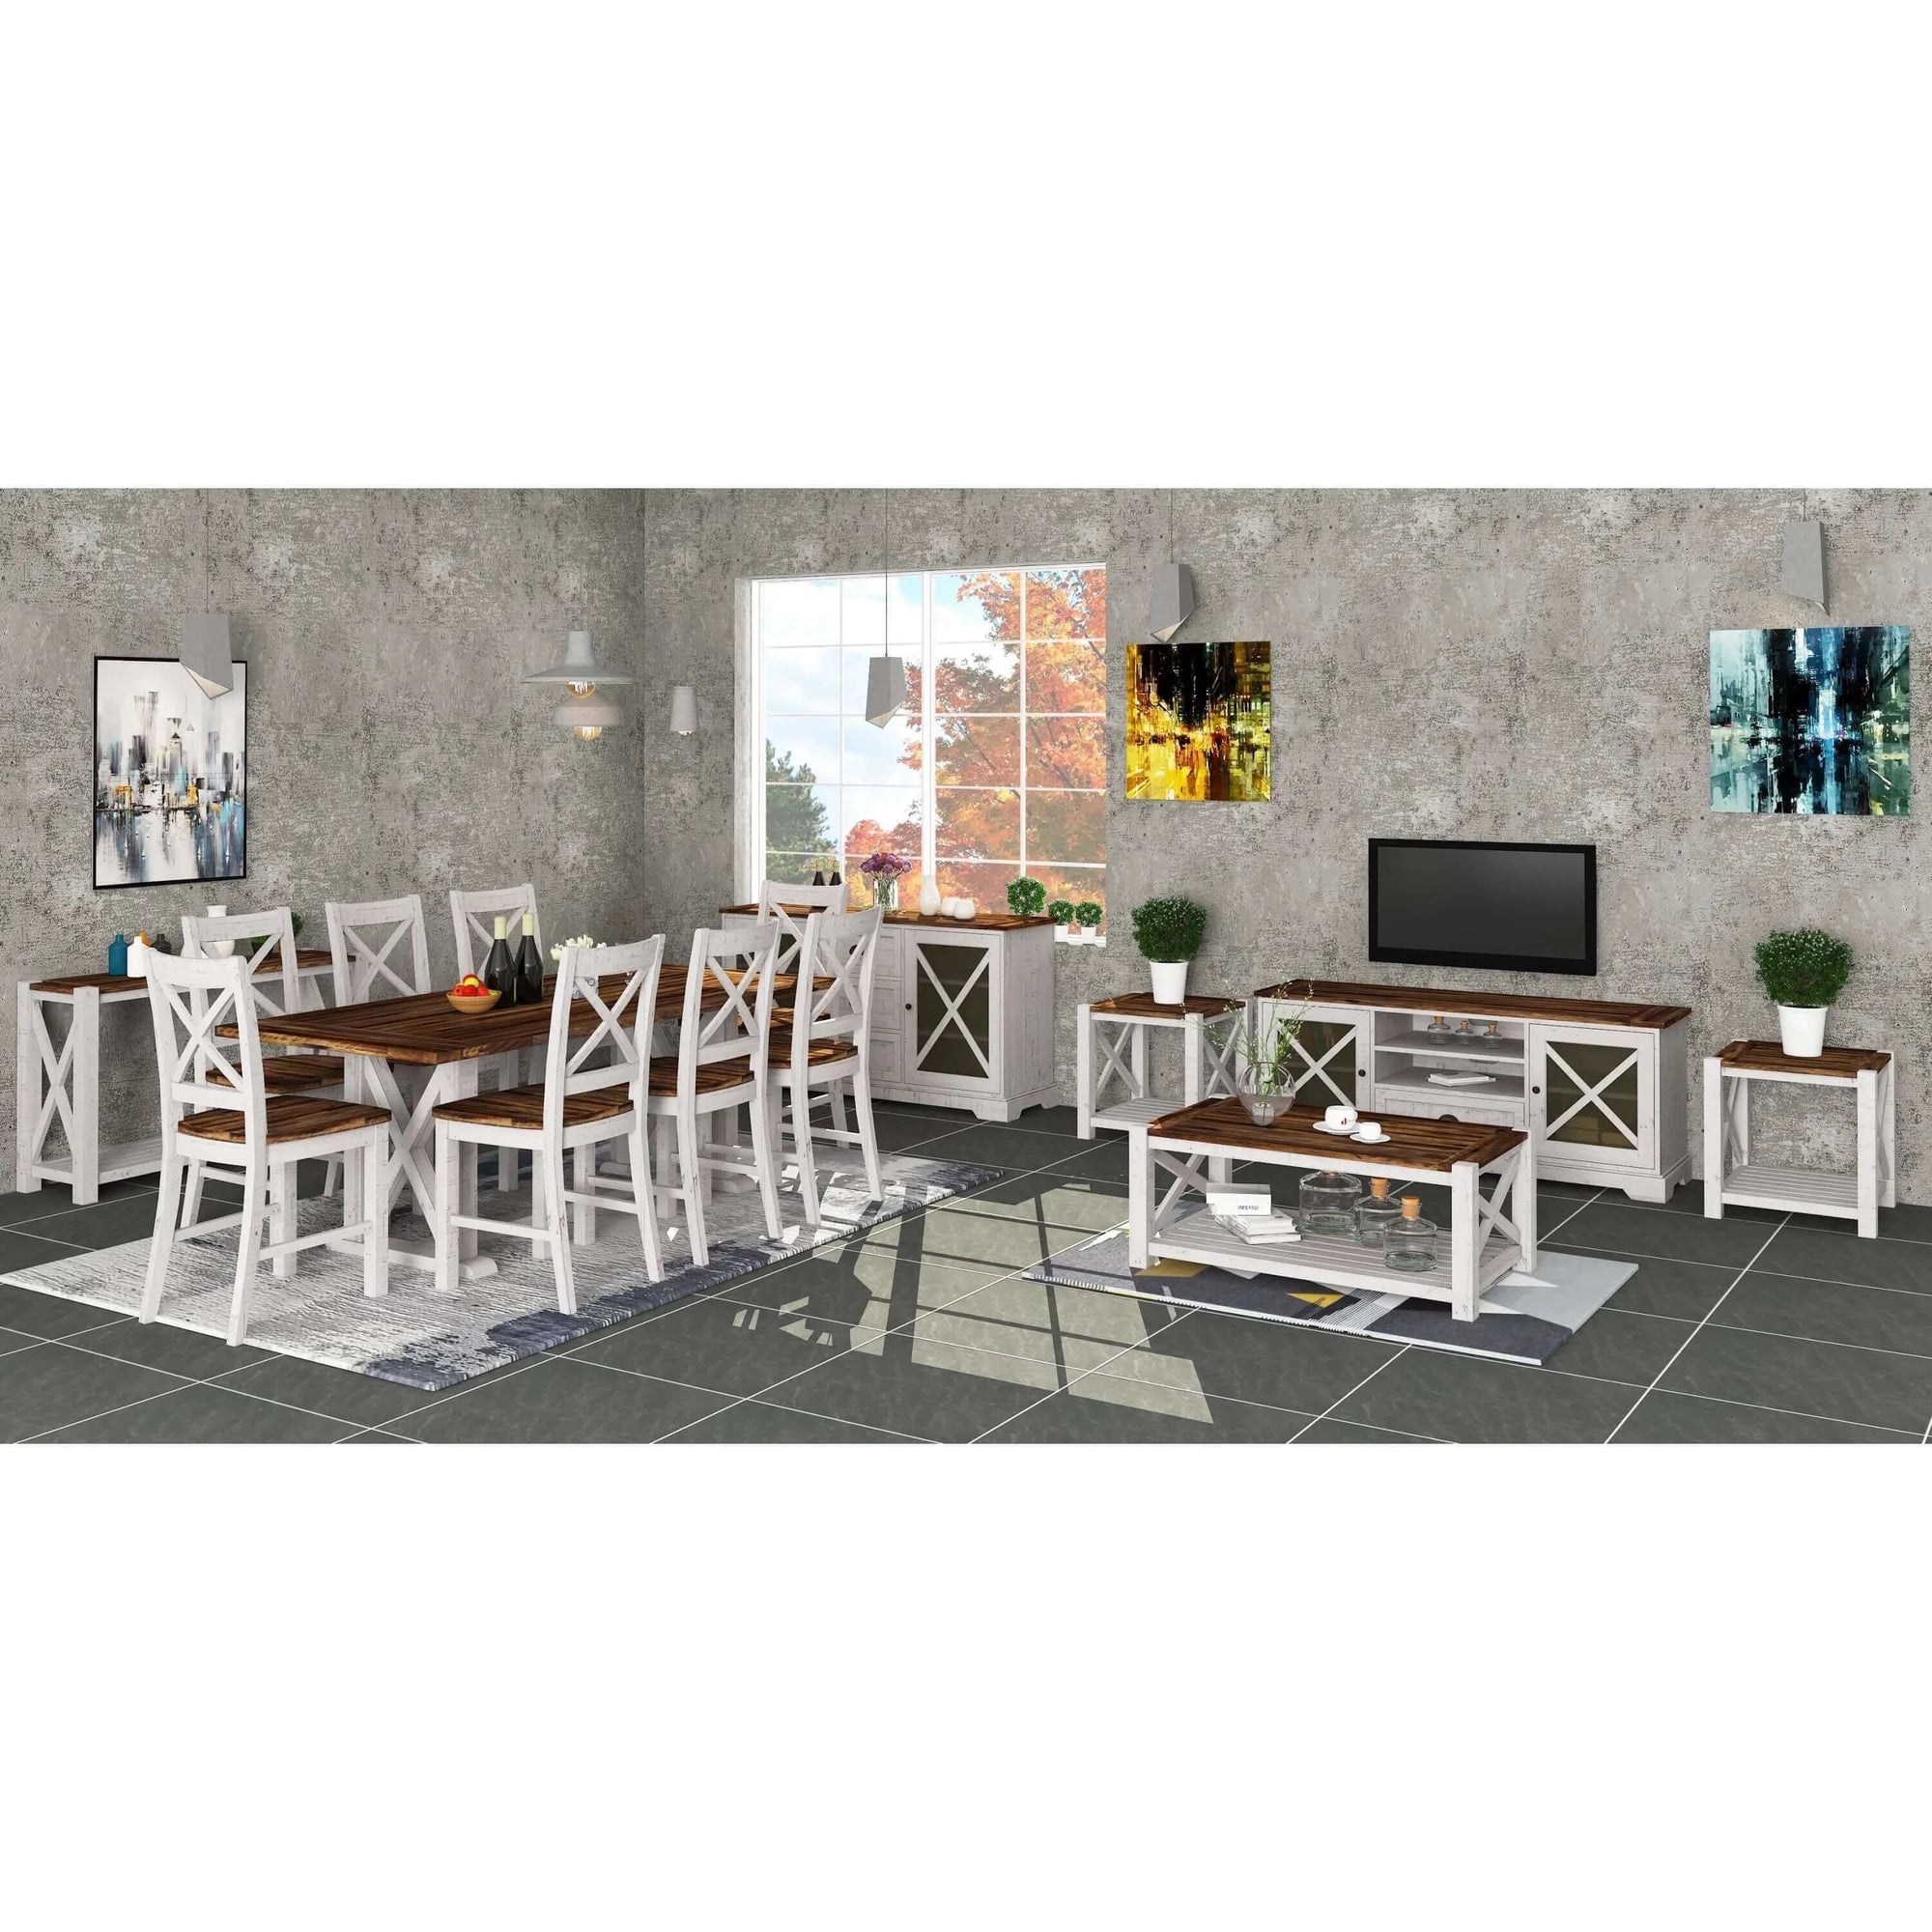 Buy erica 7pc dining set 200cm table 6 chair solid acacia wood timber brown white - upinteriors-Upinteriors